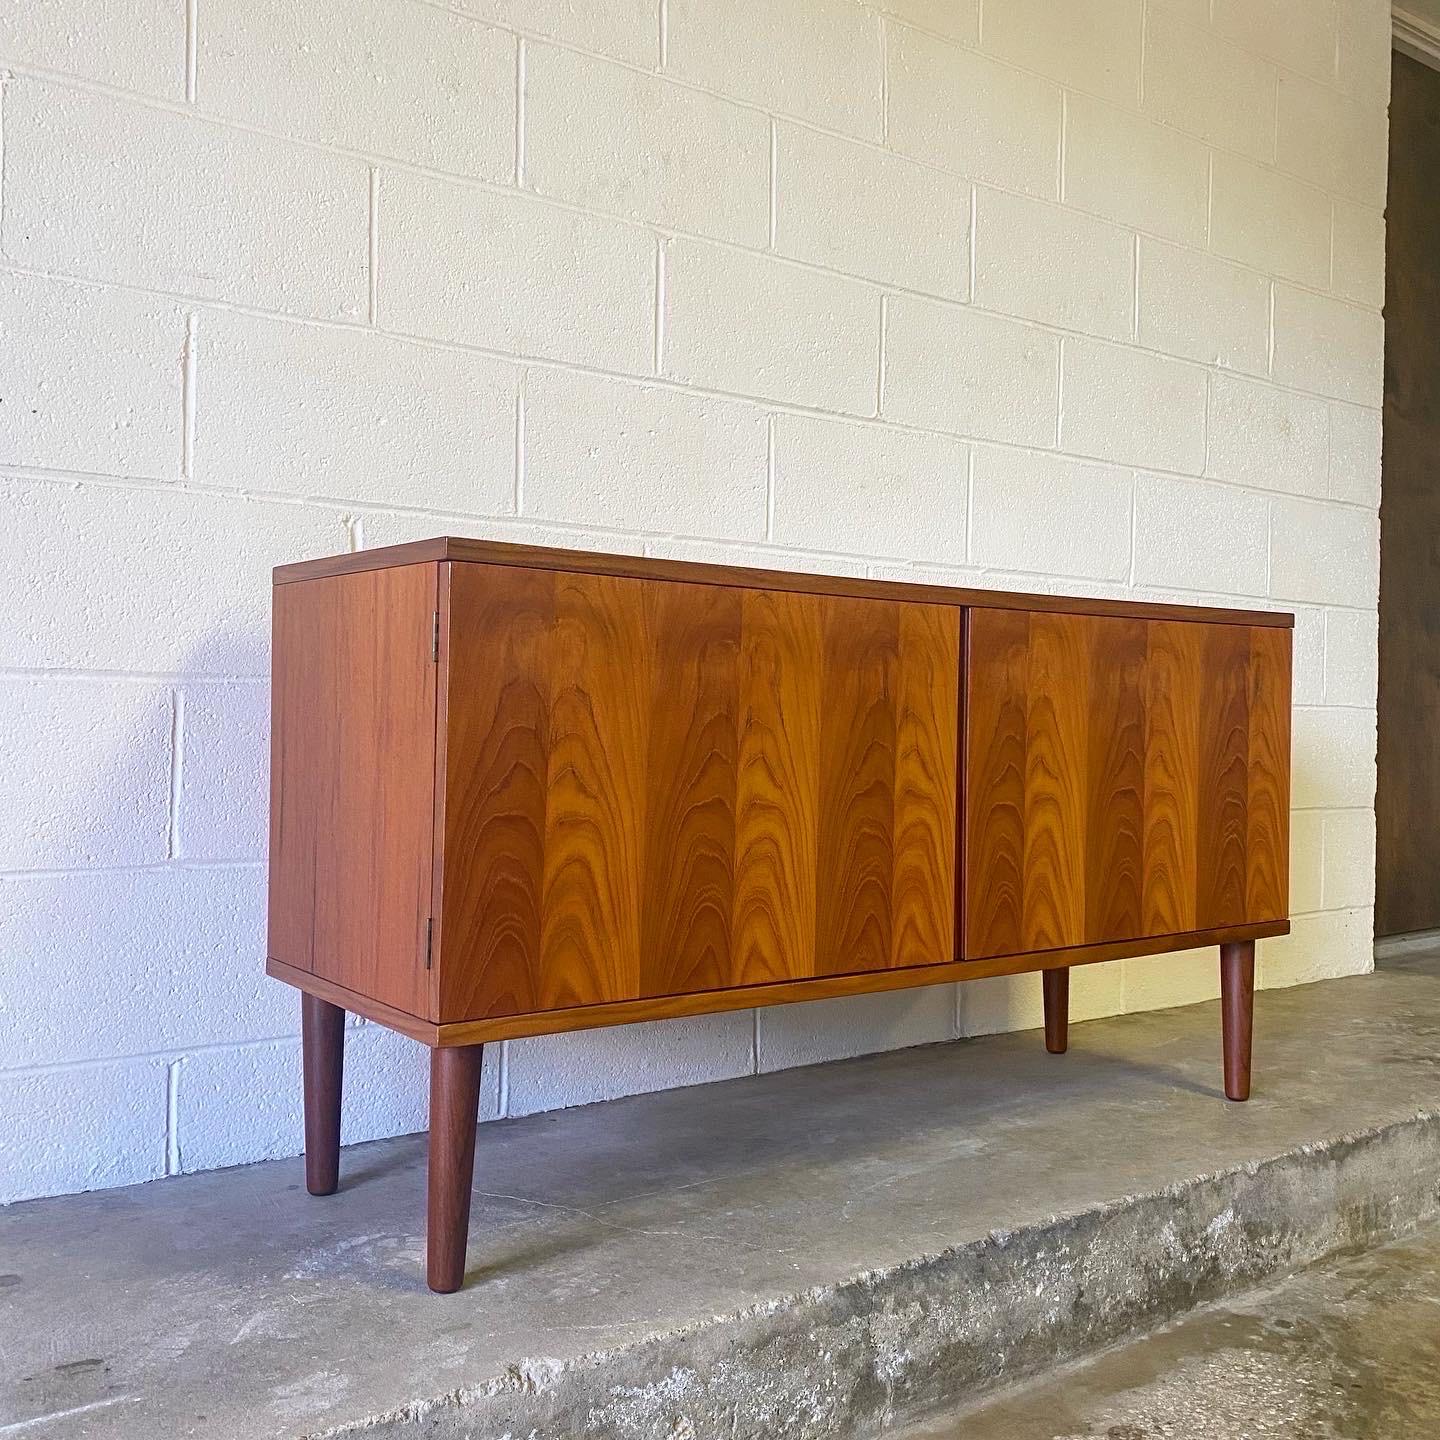 This is a great teak sideboard, buffet or credenza designed by Hans Olsen, made in Denmark ca. 1960’s. This beautifully crafted piece displays opposing teak veneers and brass fittings. Doors swing open to reveal adjustable shelving. Perfect for an